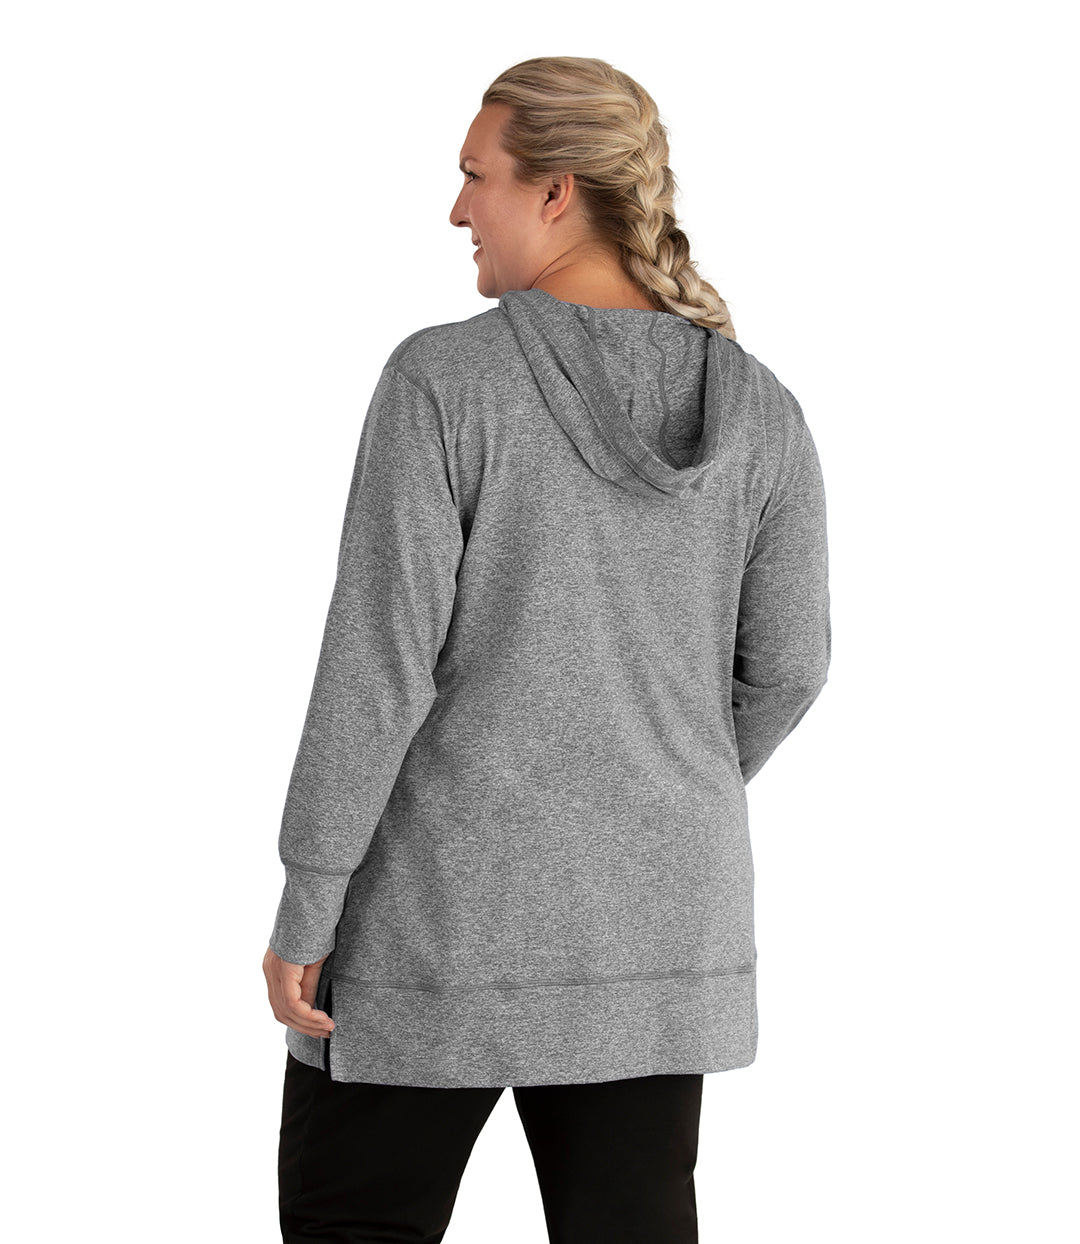 Plus size woman, facing back looking left, wearing JunoActive plus size SoftWik Long Sleeve Hoodie in the color Heather Grey. She is wearing JunoActive Plus Size Leggings in the color Black.